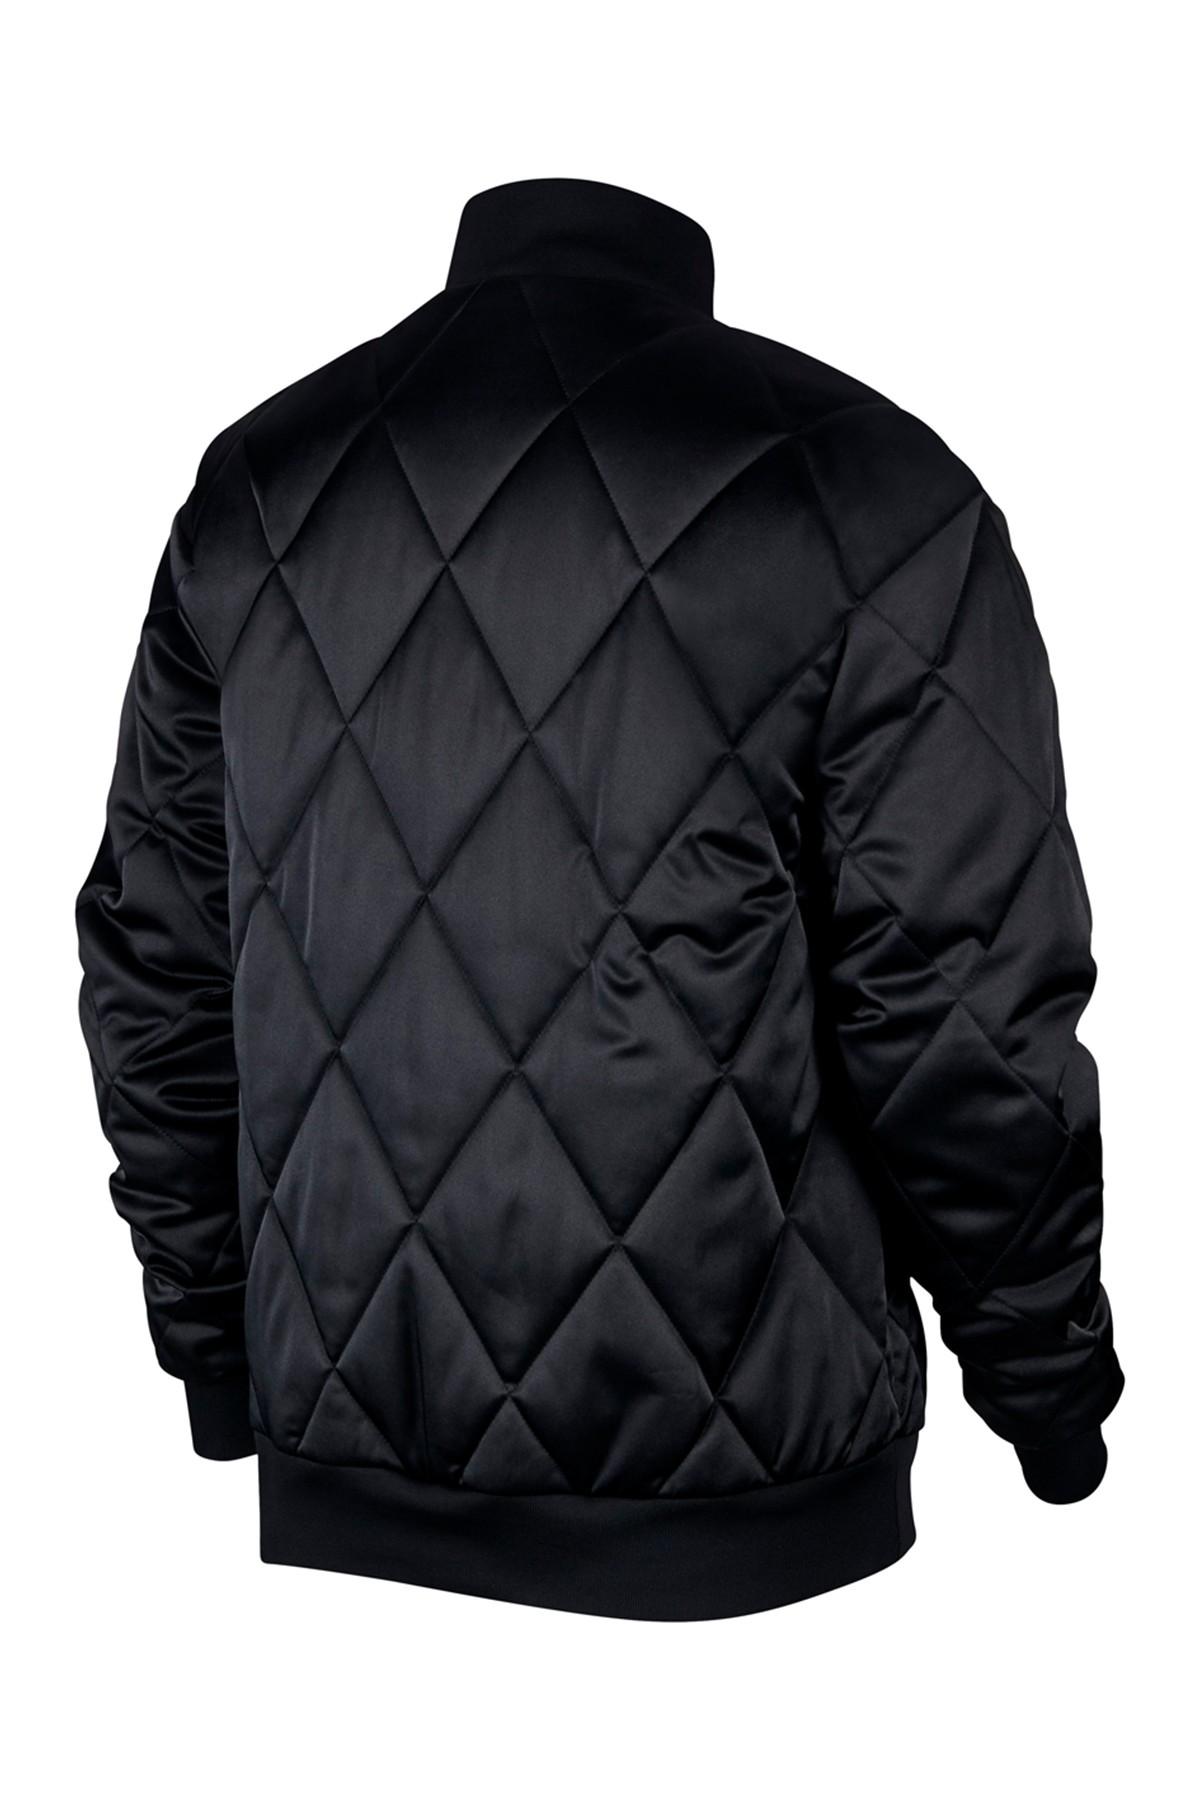 Nike Air Quilted Satin Jacket in Black | Lyst